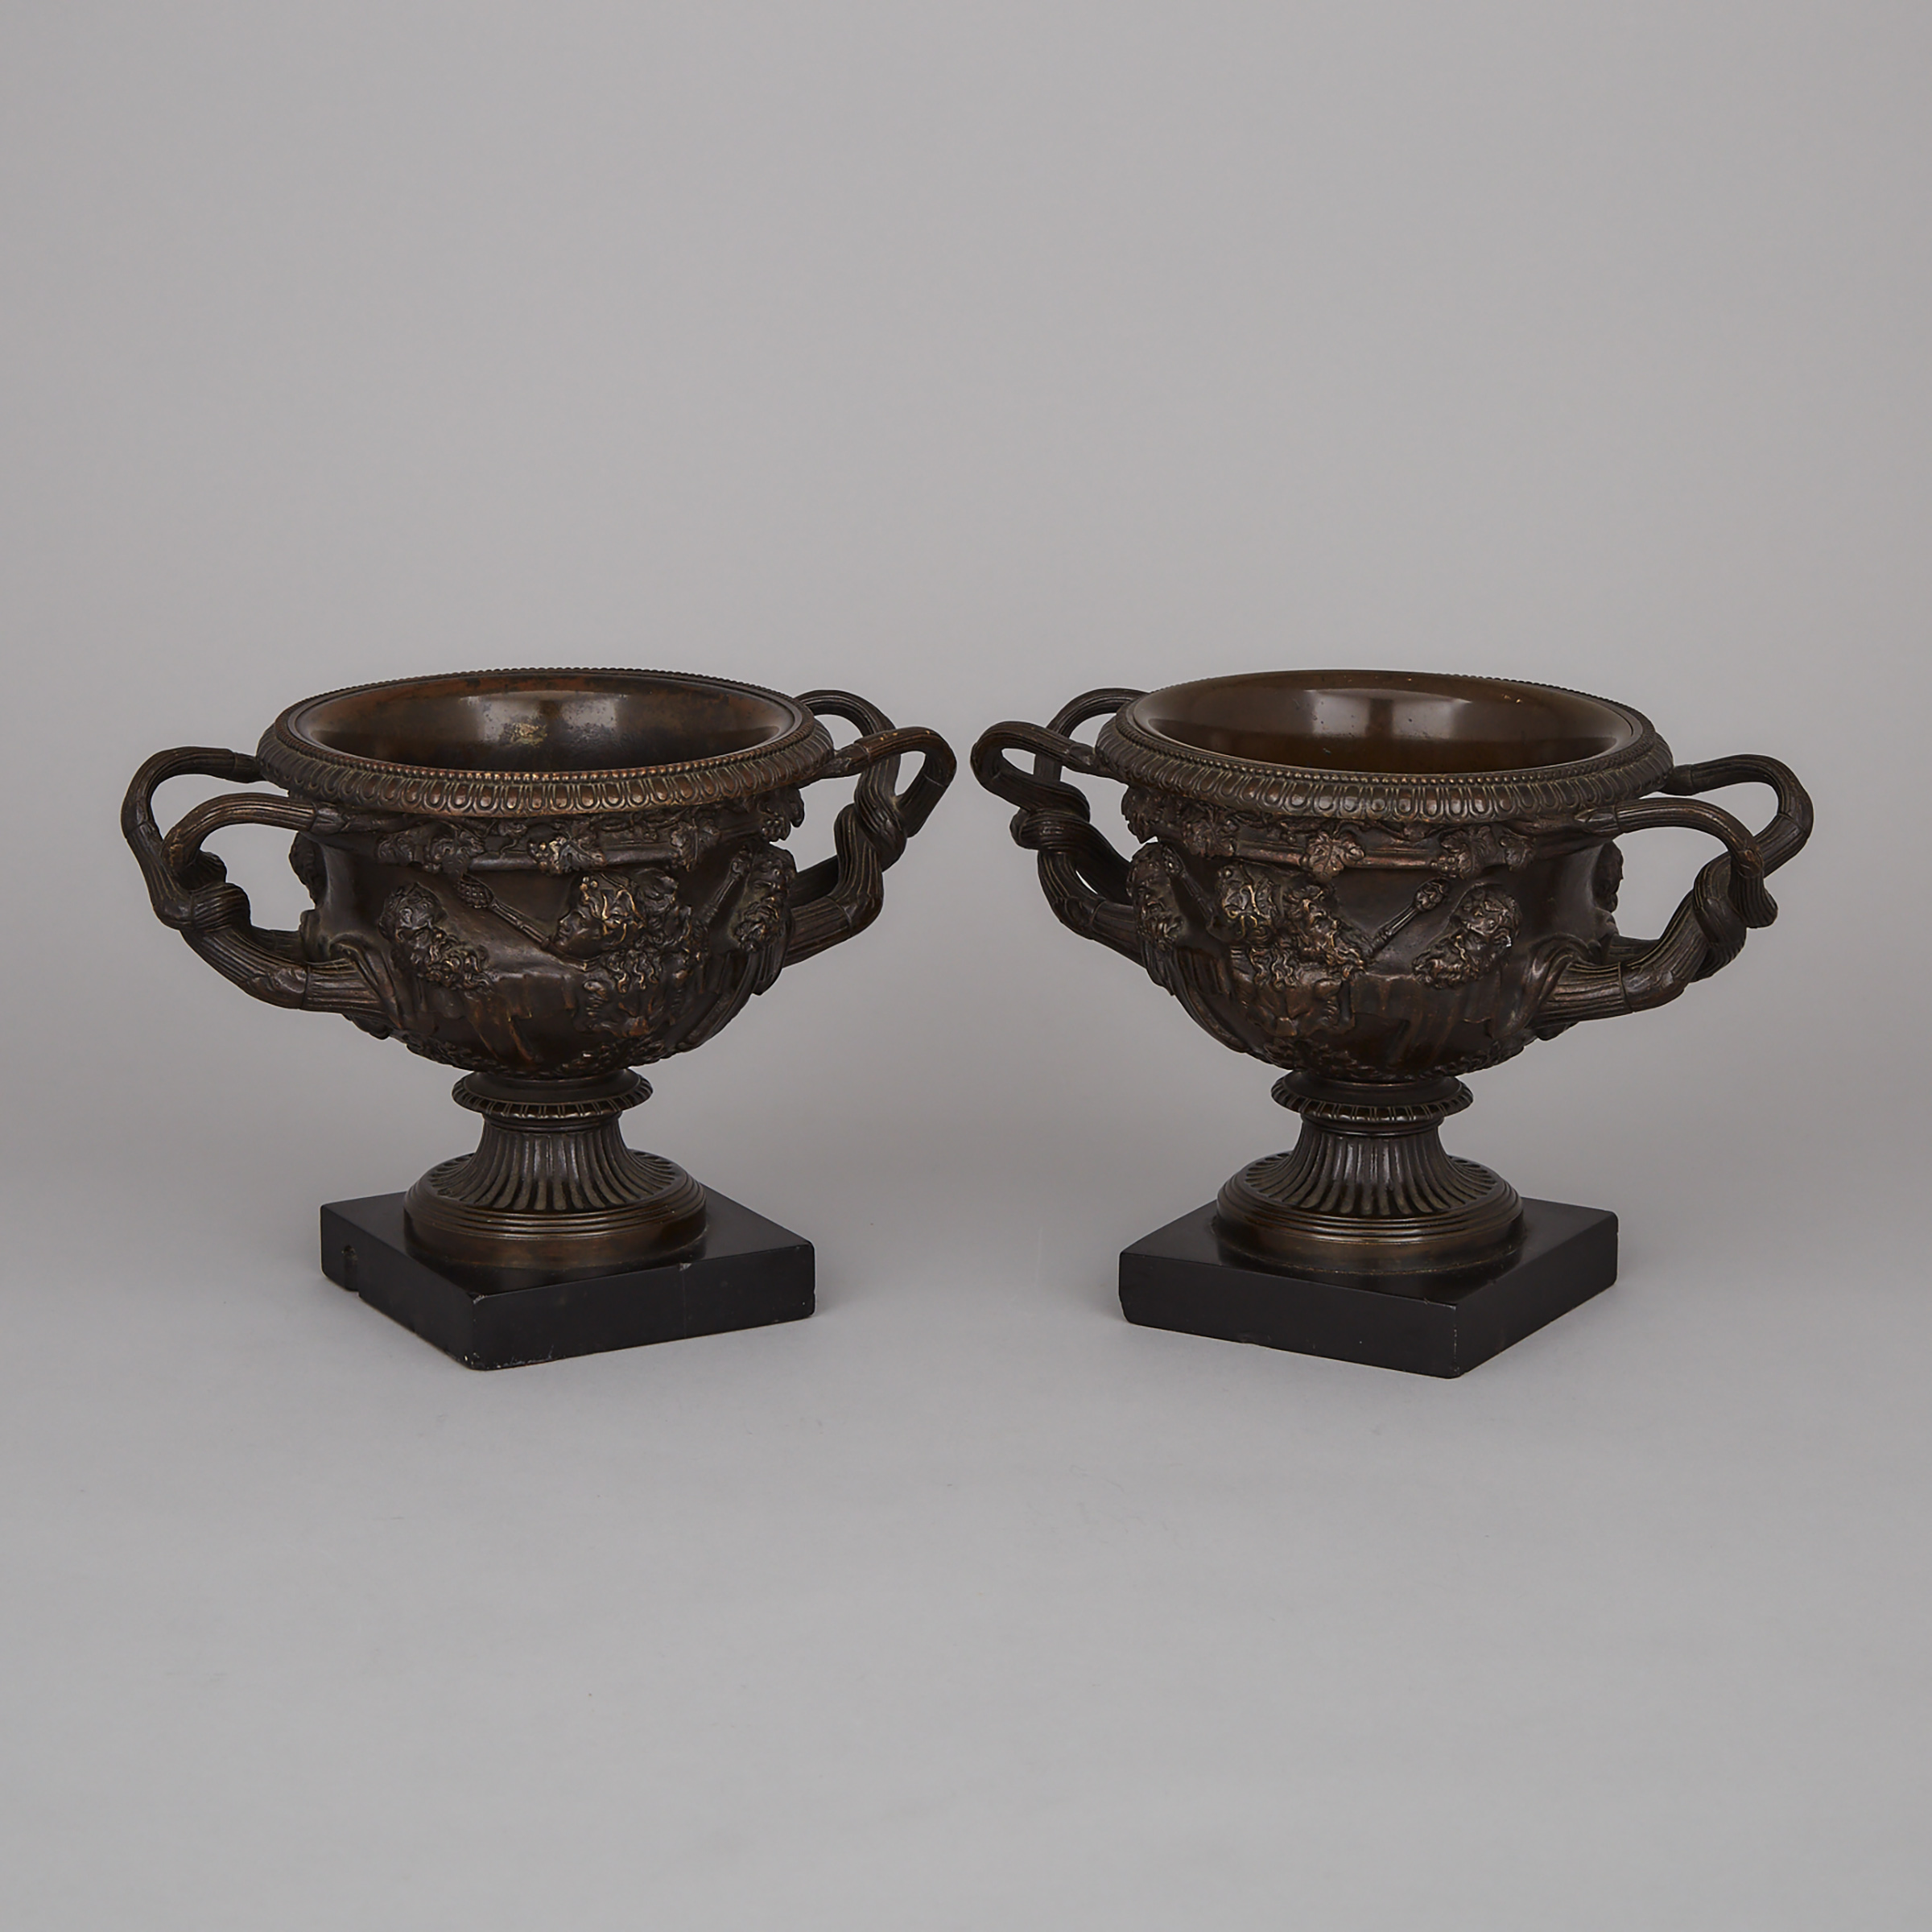 Pair of Patinated Bronze Models of the Warwick Vase, c.1880